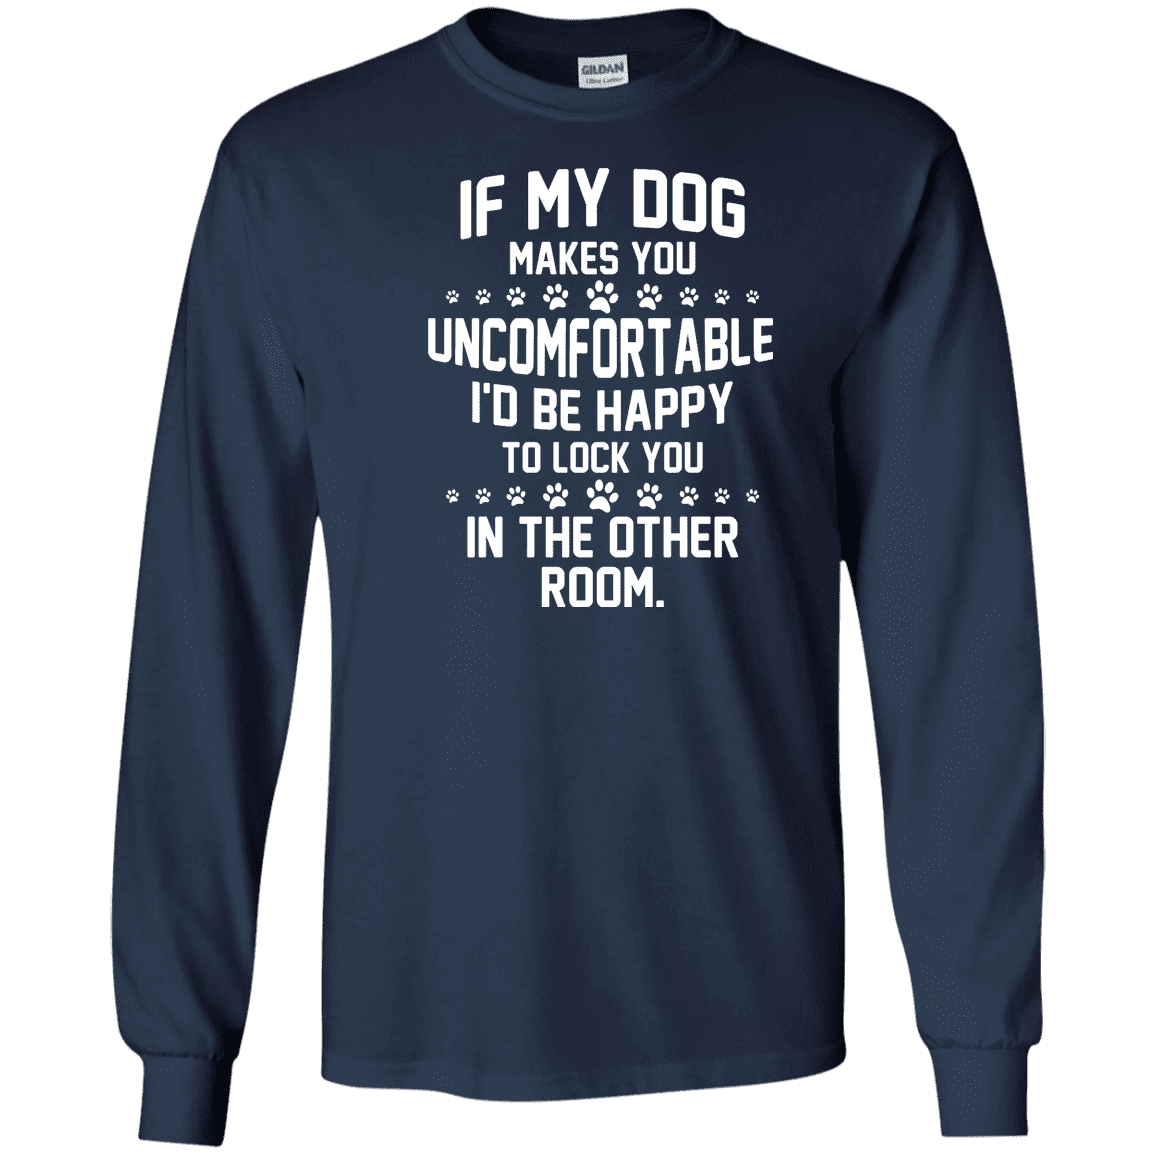 If My Dog Makes You Uncomfortable - Long Sleeve T Shirt.